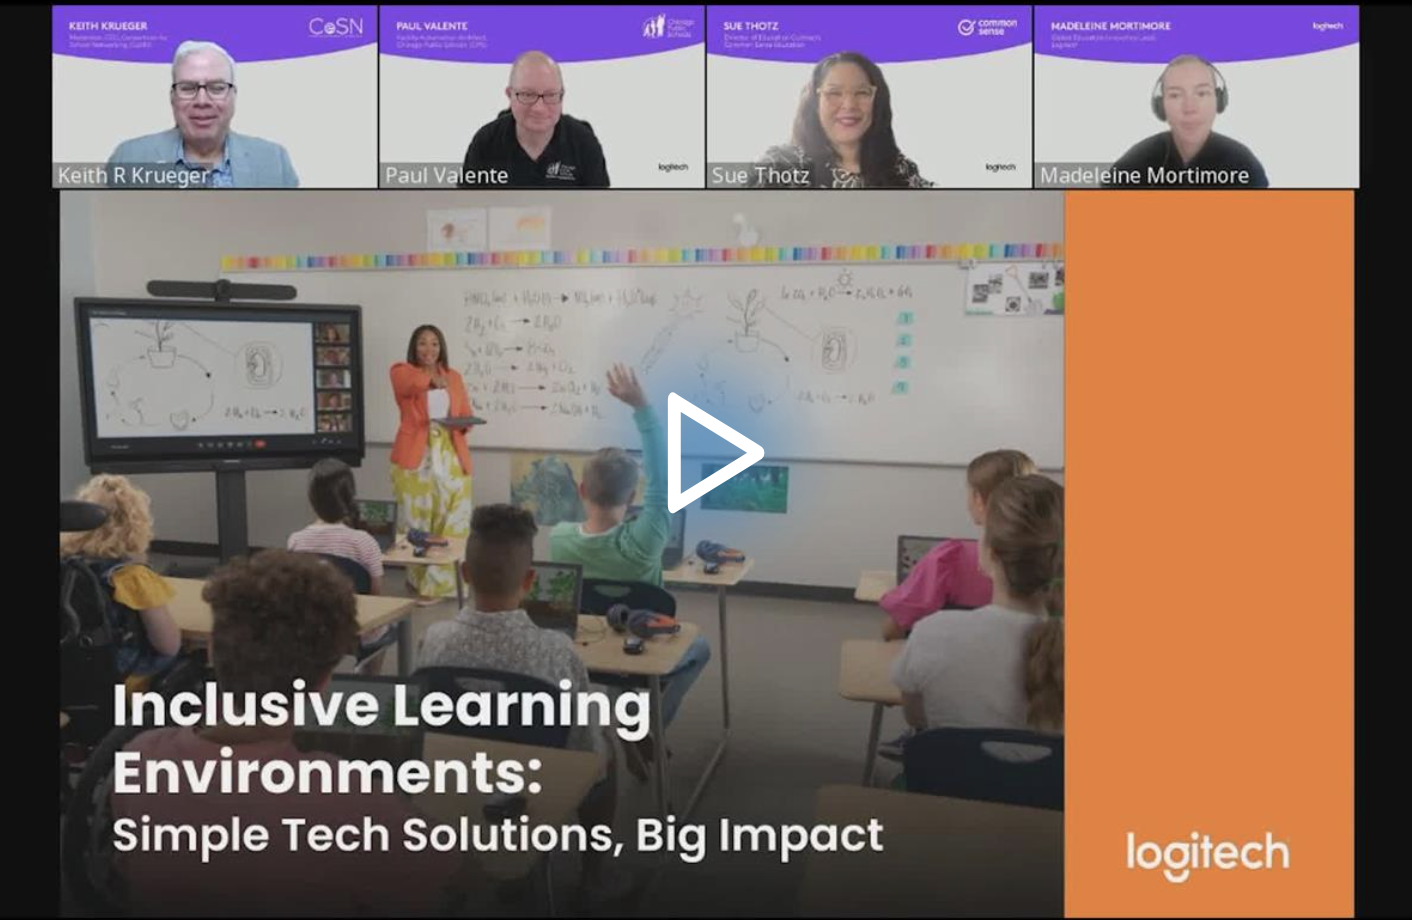 Inclusive Learning Environments: Simple Tech Solutions, Big Impact edLeader Panel recording screenshot